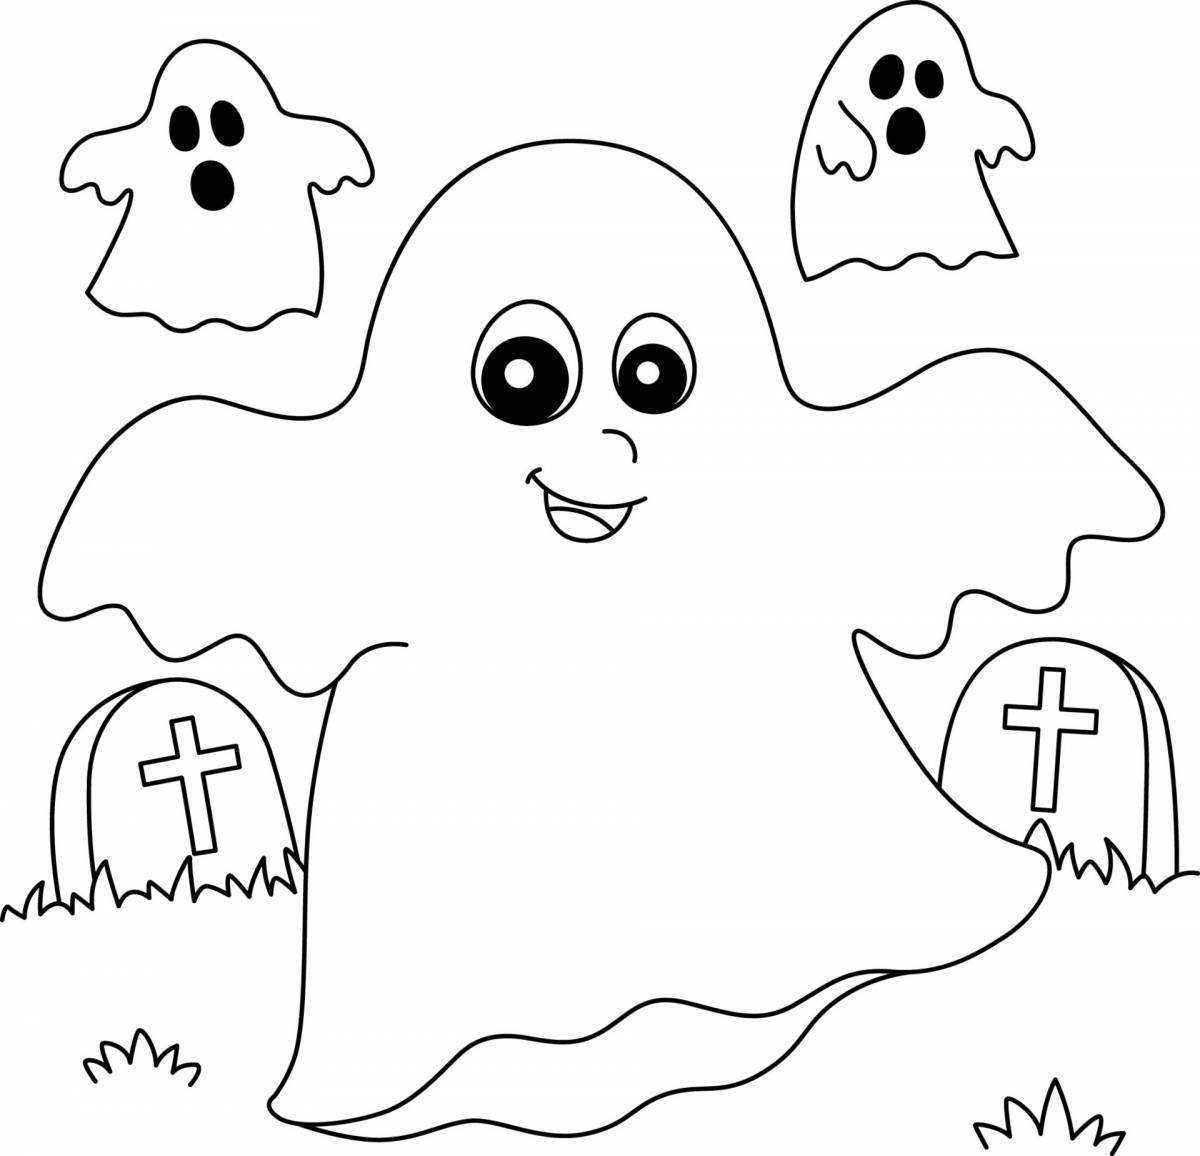 Amazing ghost coloring book for kids